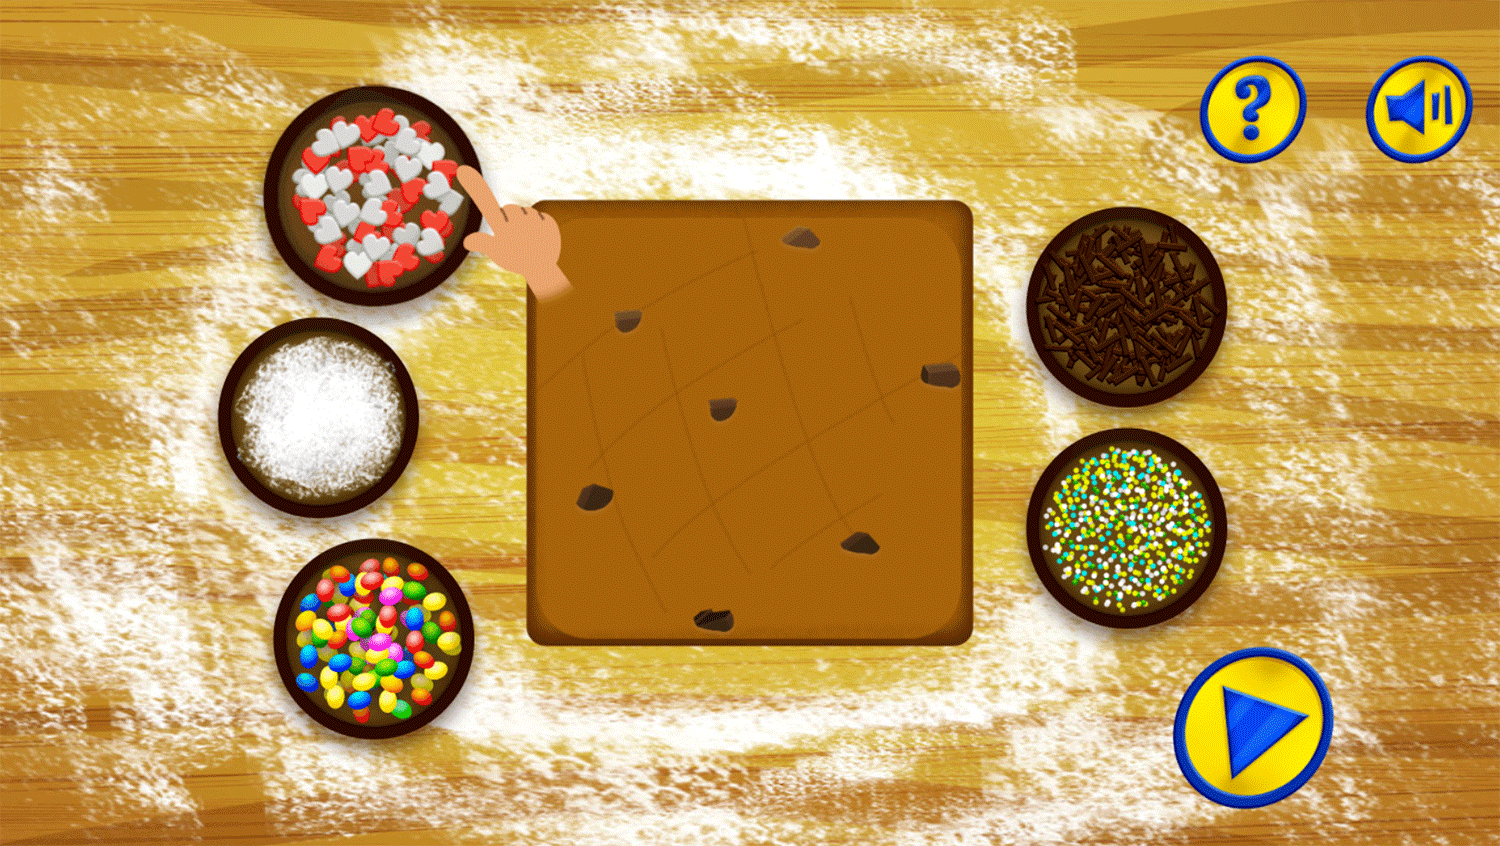 Dorothy and the Wizard of Oz Cookie Magic Game Add Sprinkles Screenshot.